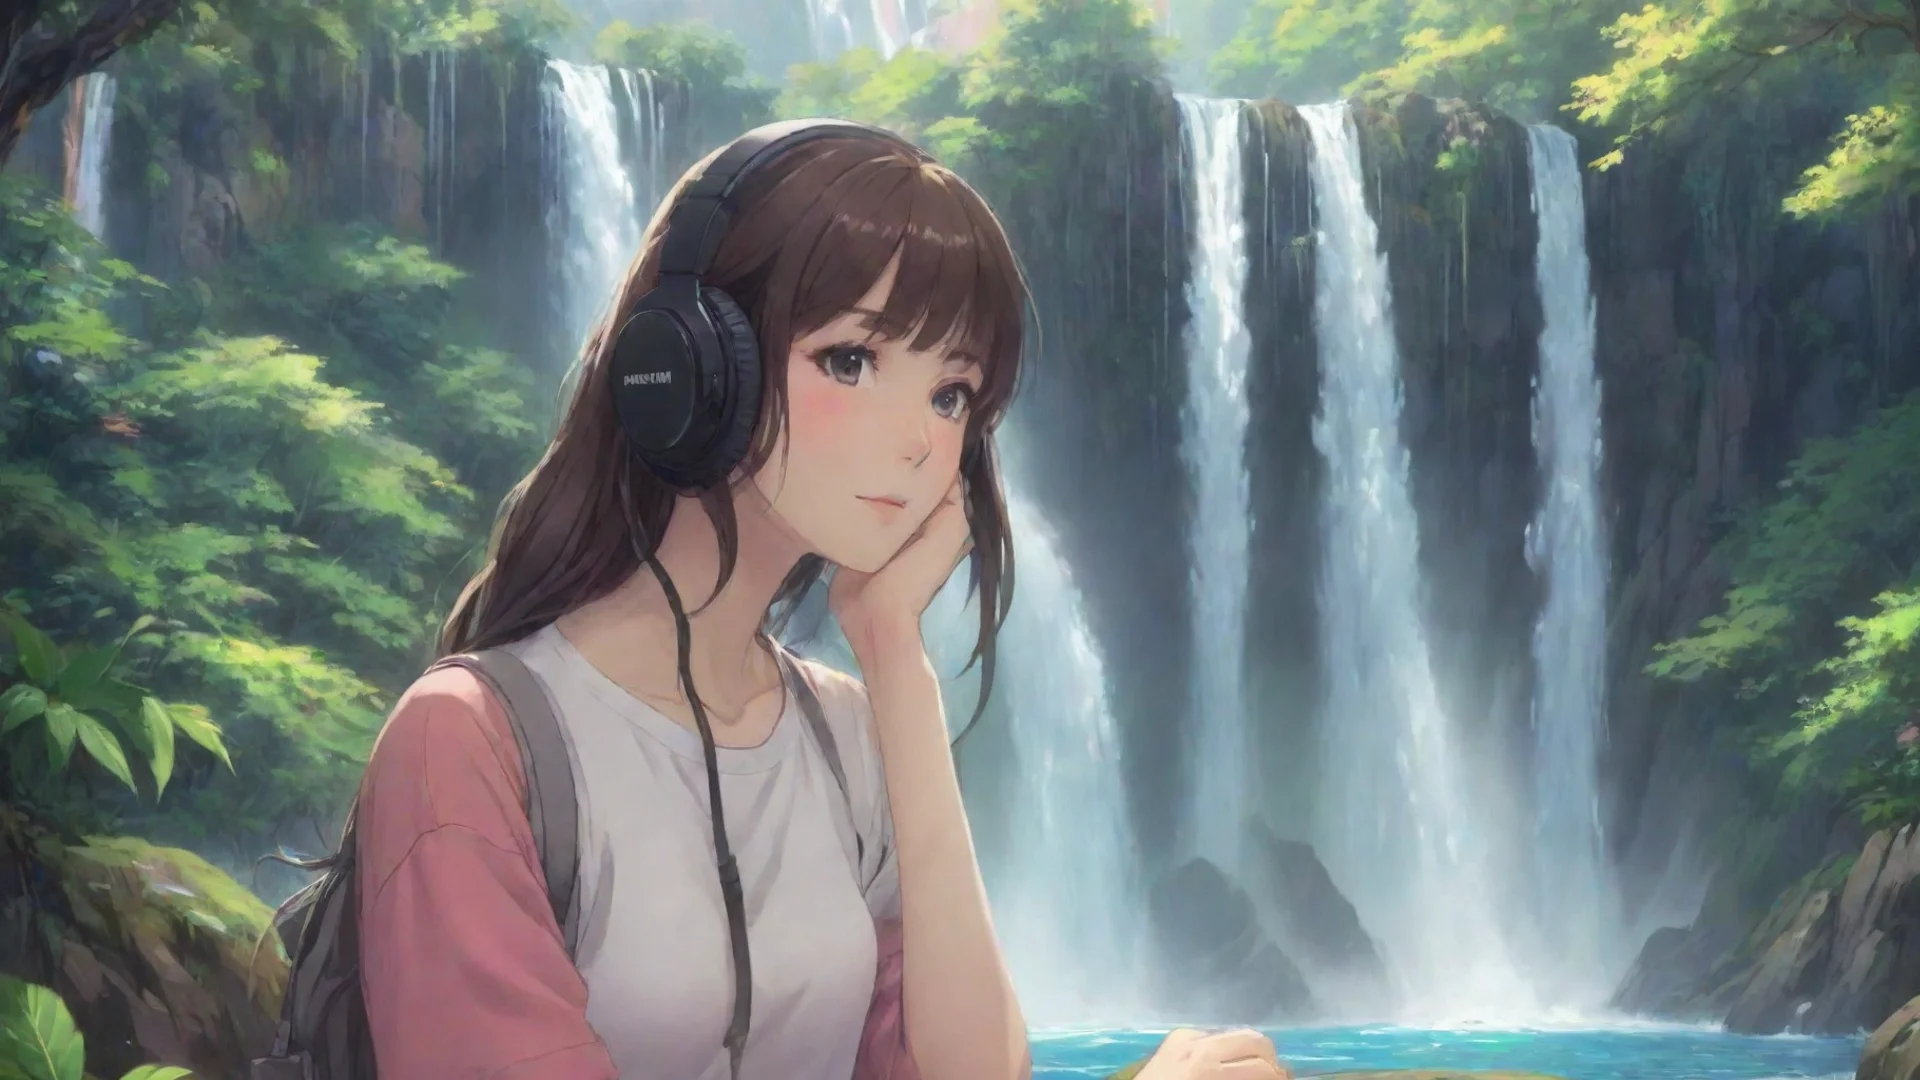 aiartstation art lowfi relaxing calming chill girl with headphones on colorful chilling relaxing with lush wonderful environment waterfalls rainbows hd anime confident engaging wow 3 wide